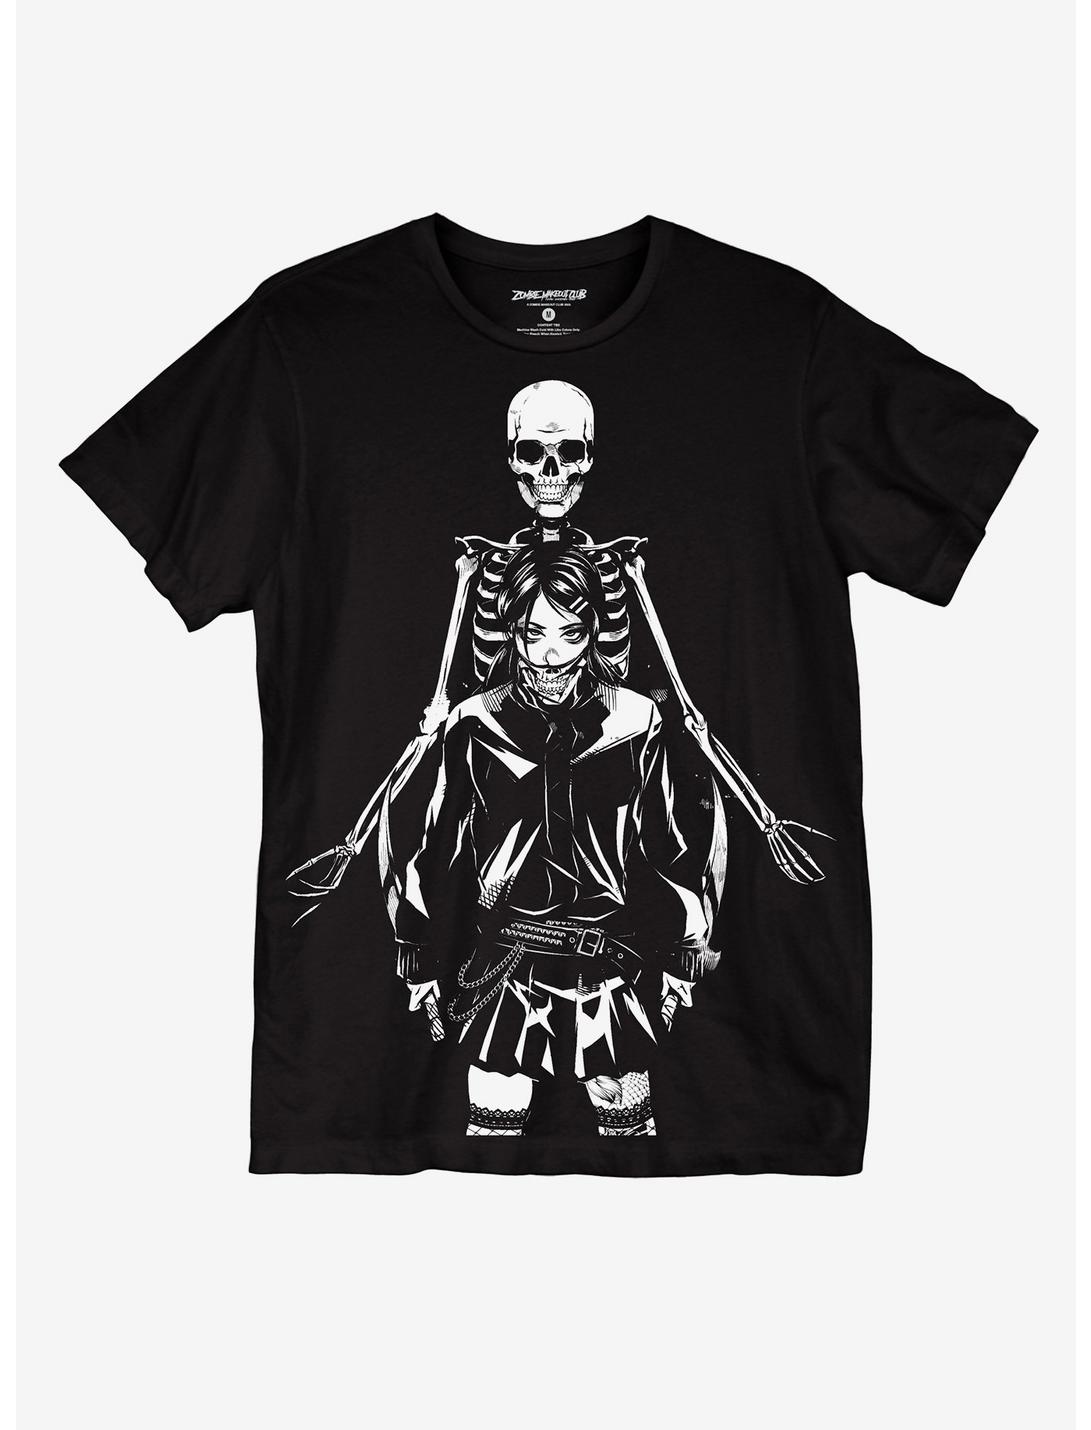 Skeleton Mask Girl T-Shirt By Zombie Makeout Club, BLACK, hi-res